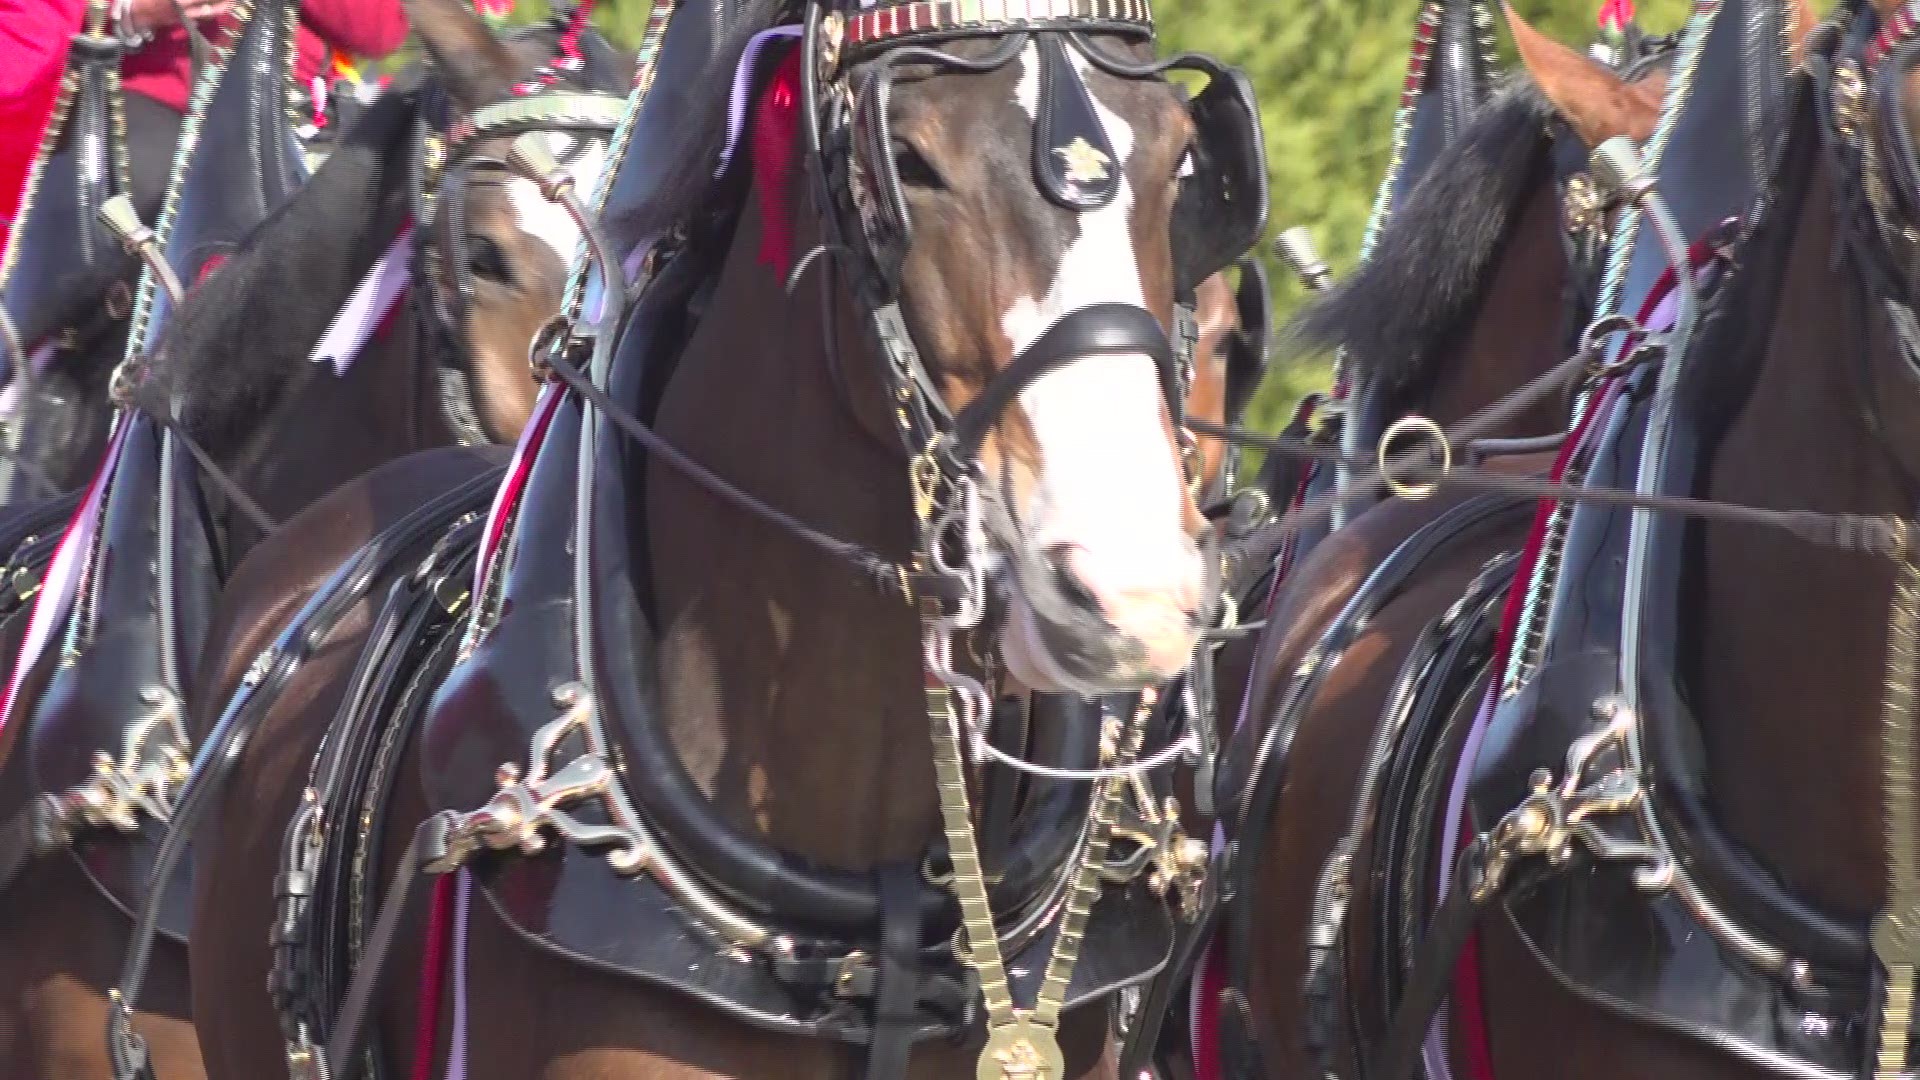 The Budweiser mascots are making their way to the big game, stopping to see their fans at spots around  the Atlanta metro area.